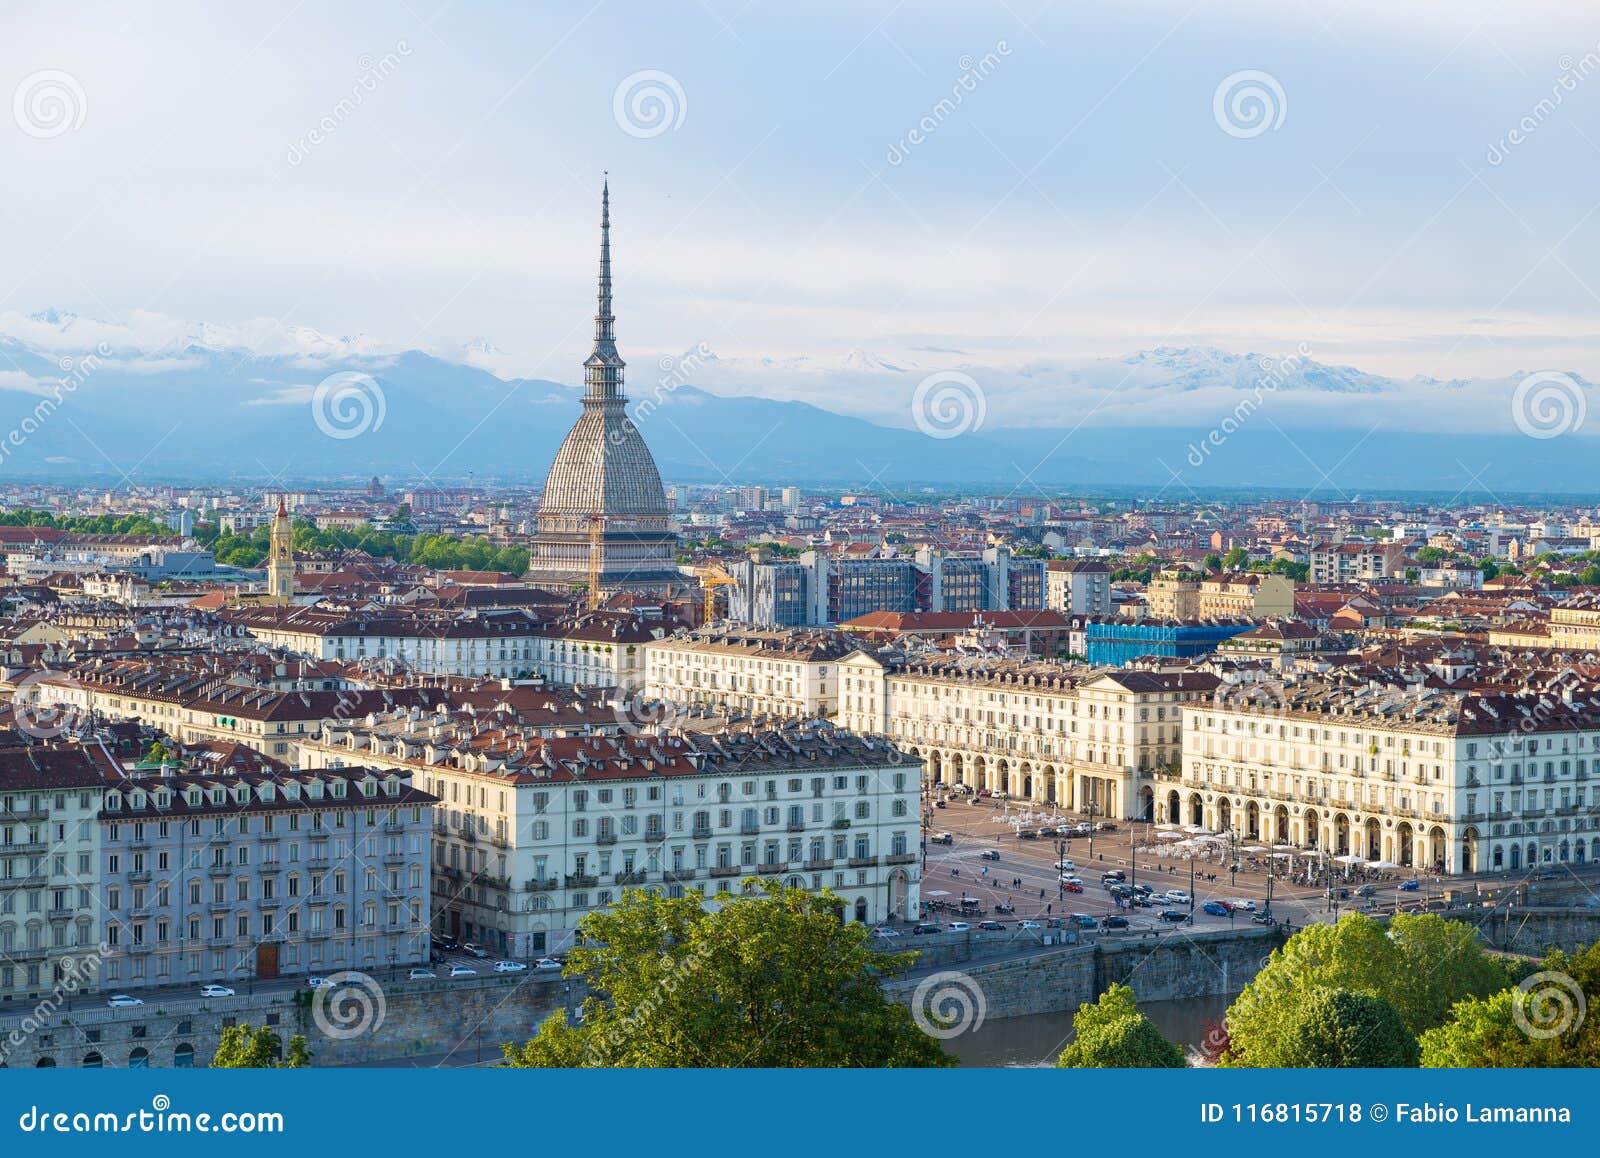 turin skyline at sunset, torino, italy, panorama cityscape with the mole antonelliana over the city. scenic colorful light and dra